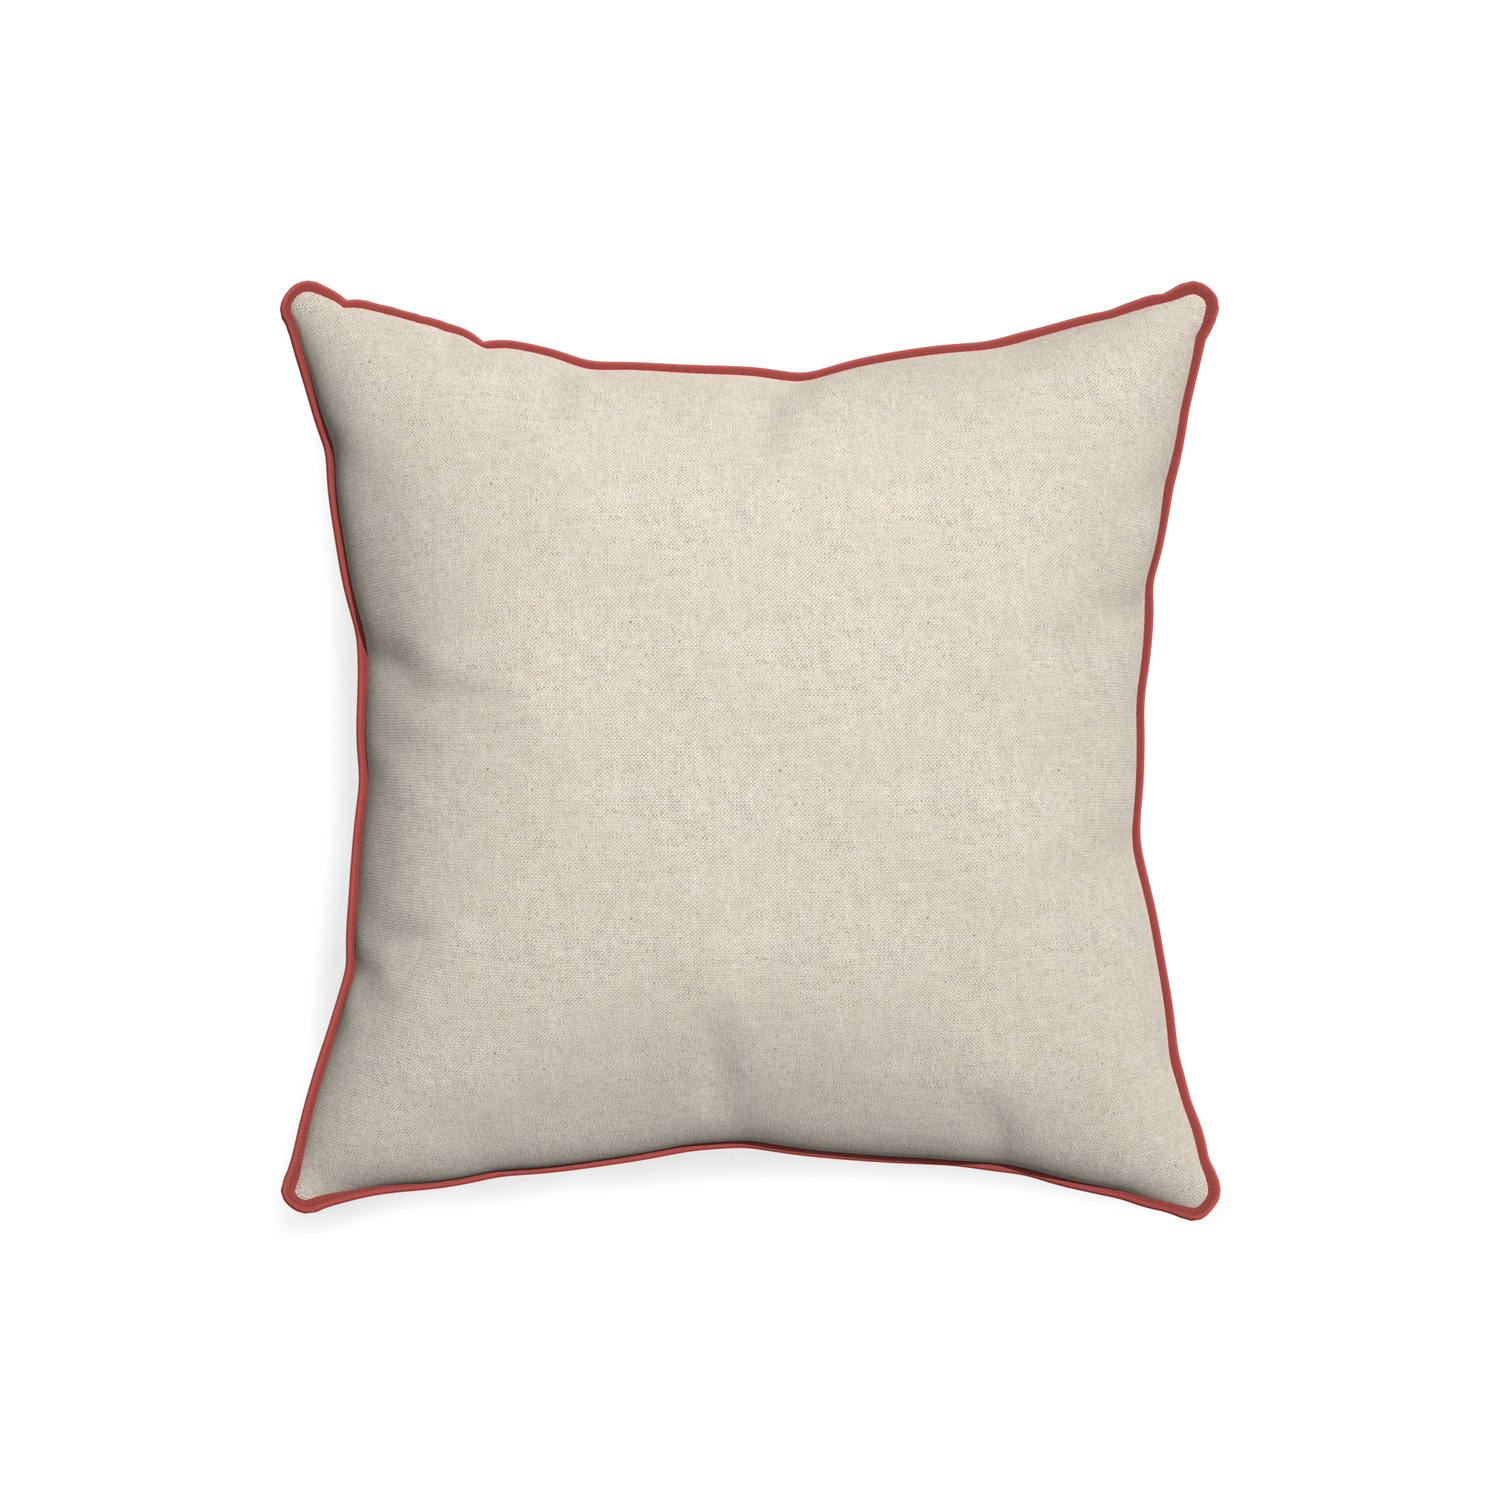 20-square oat custom light brownpillow with c piping on white background